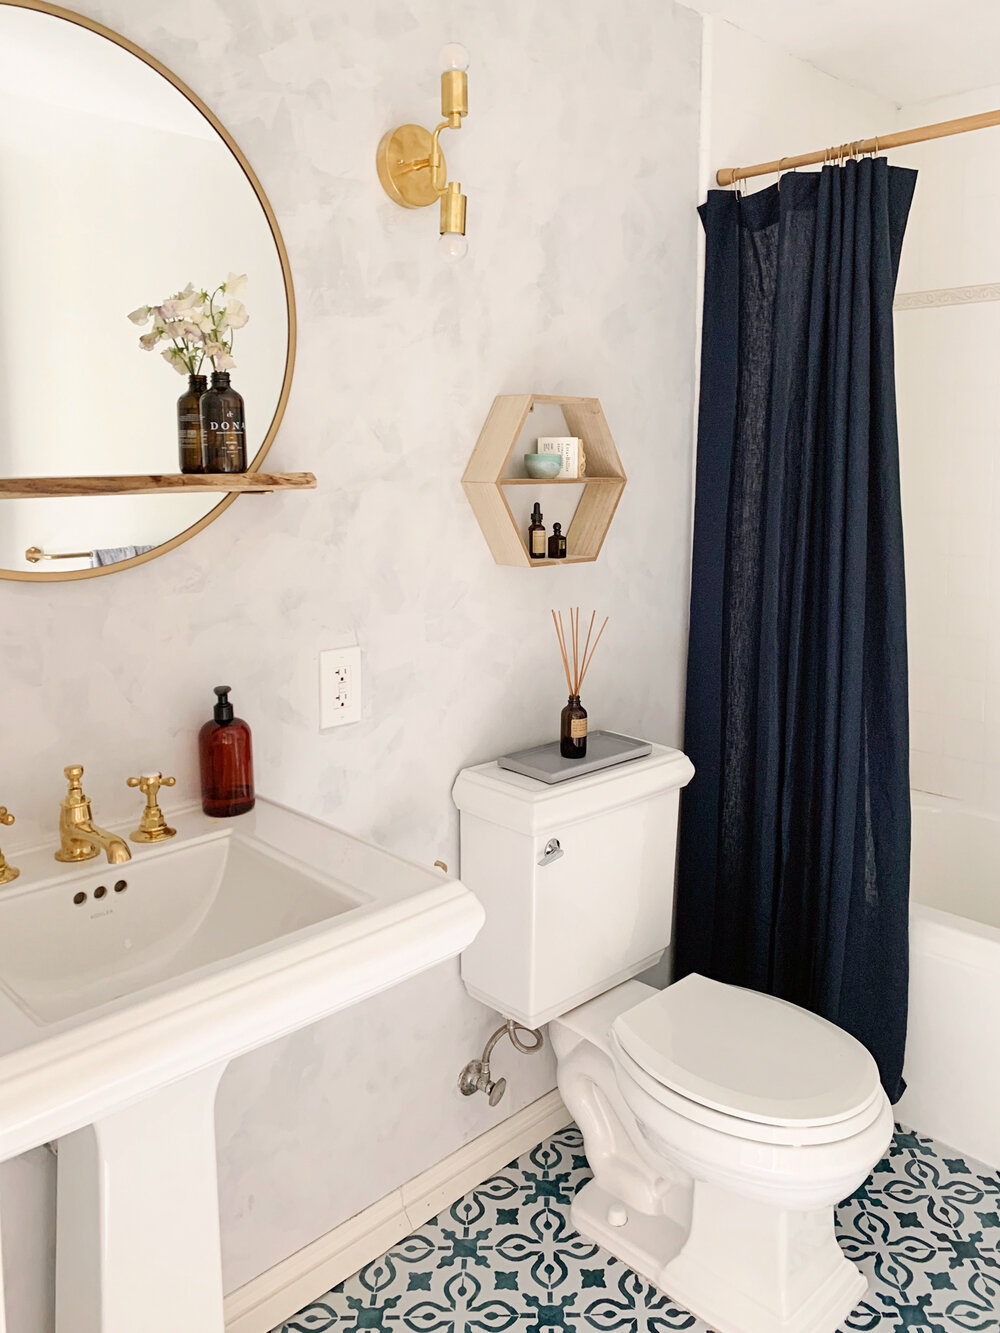  The navy linen shower curtain matches the patterned floors and adds depth to the light walls. 